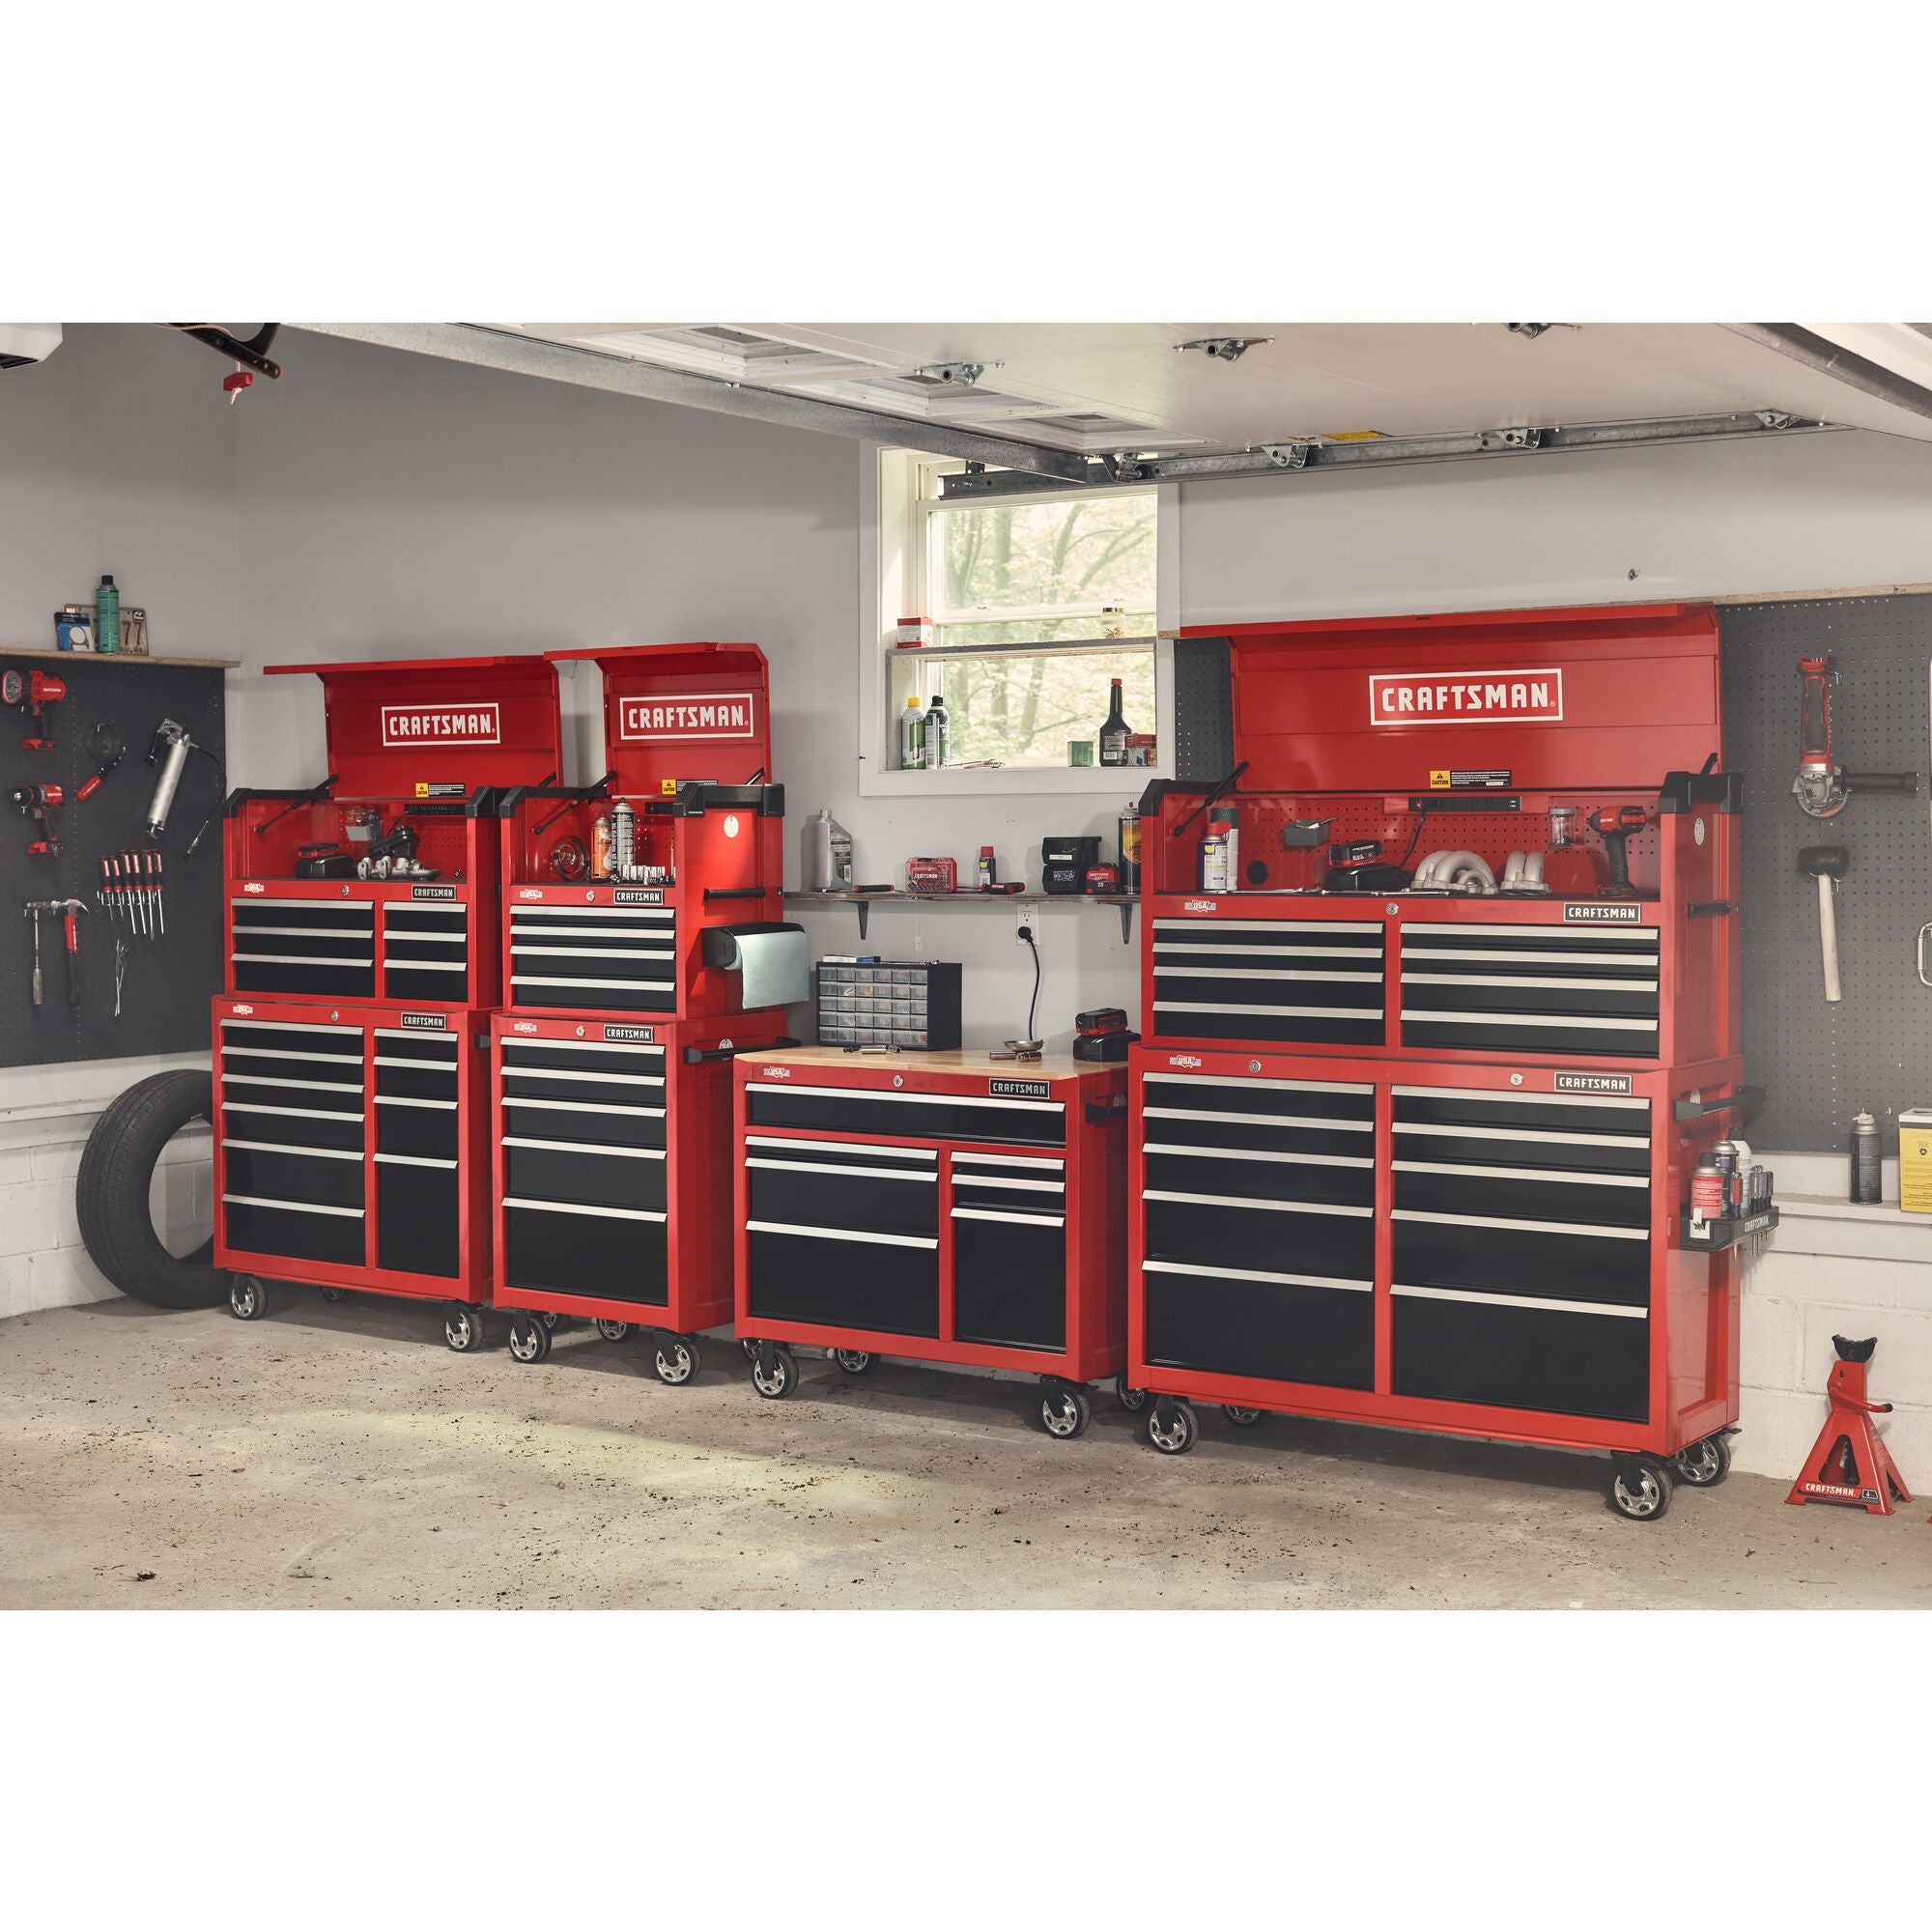 View of CRAFTSMAN Storage: Cabinets & Chests Rolling family of products